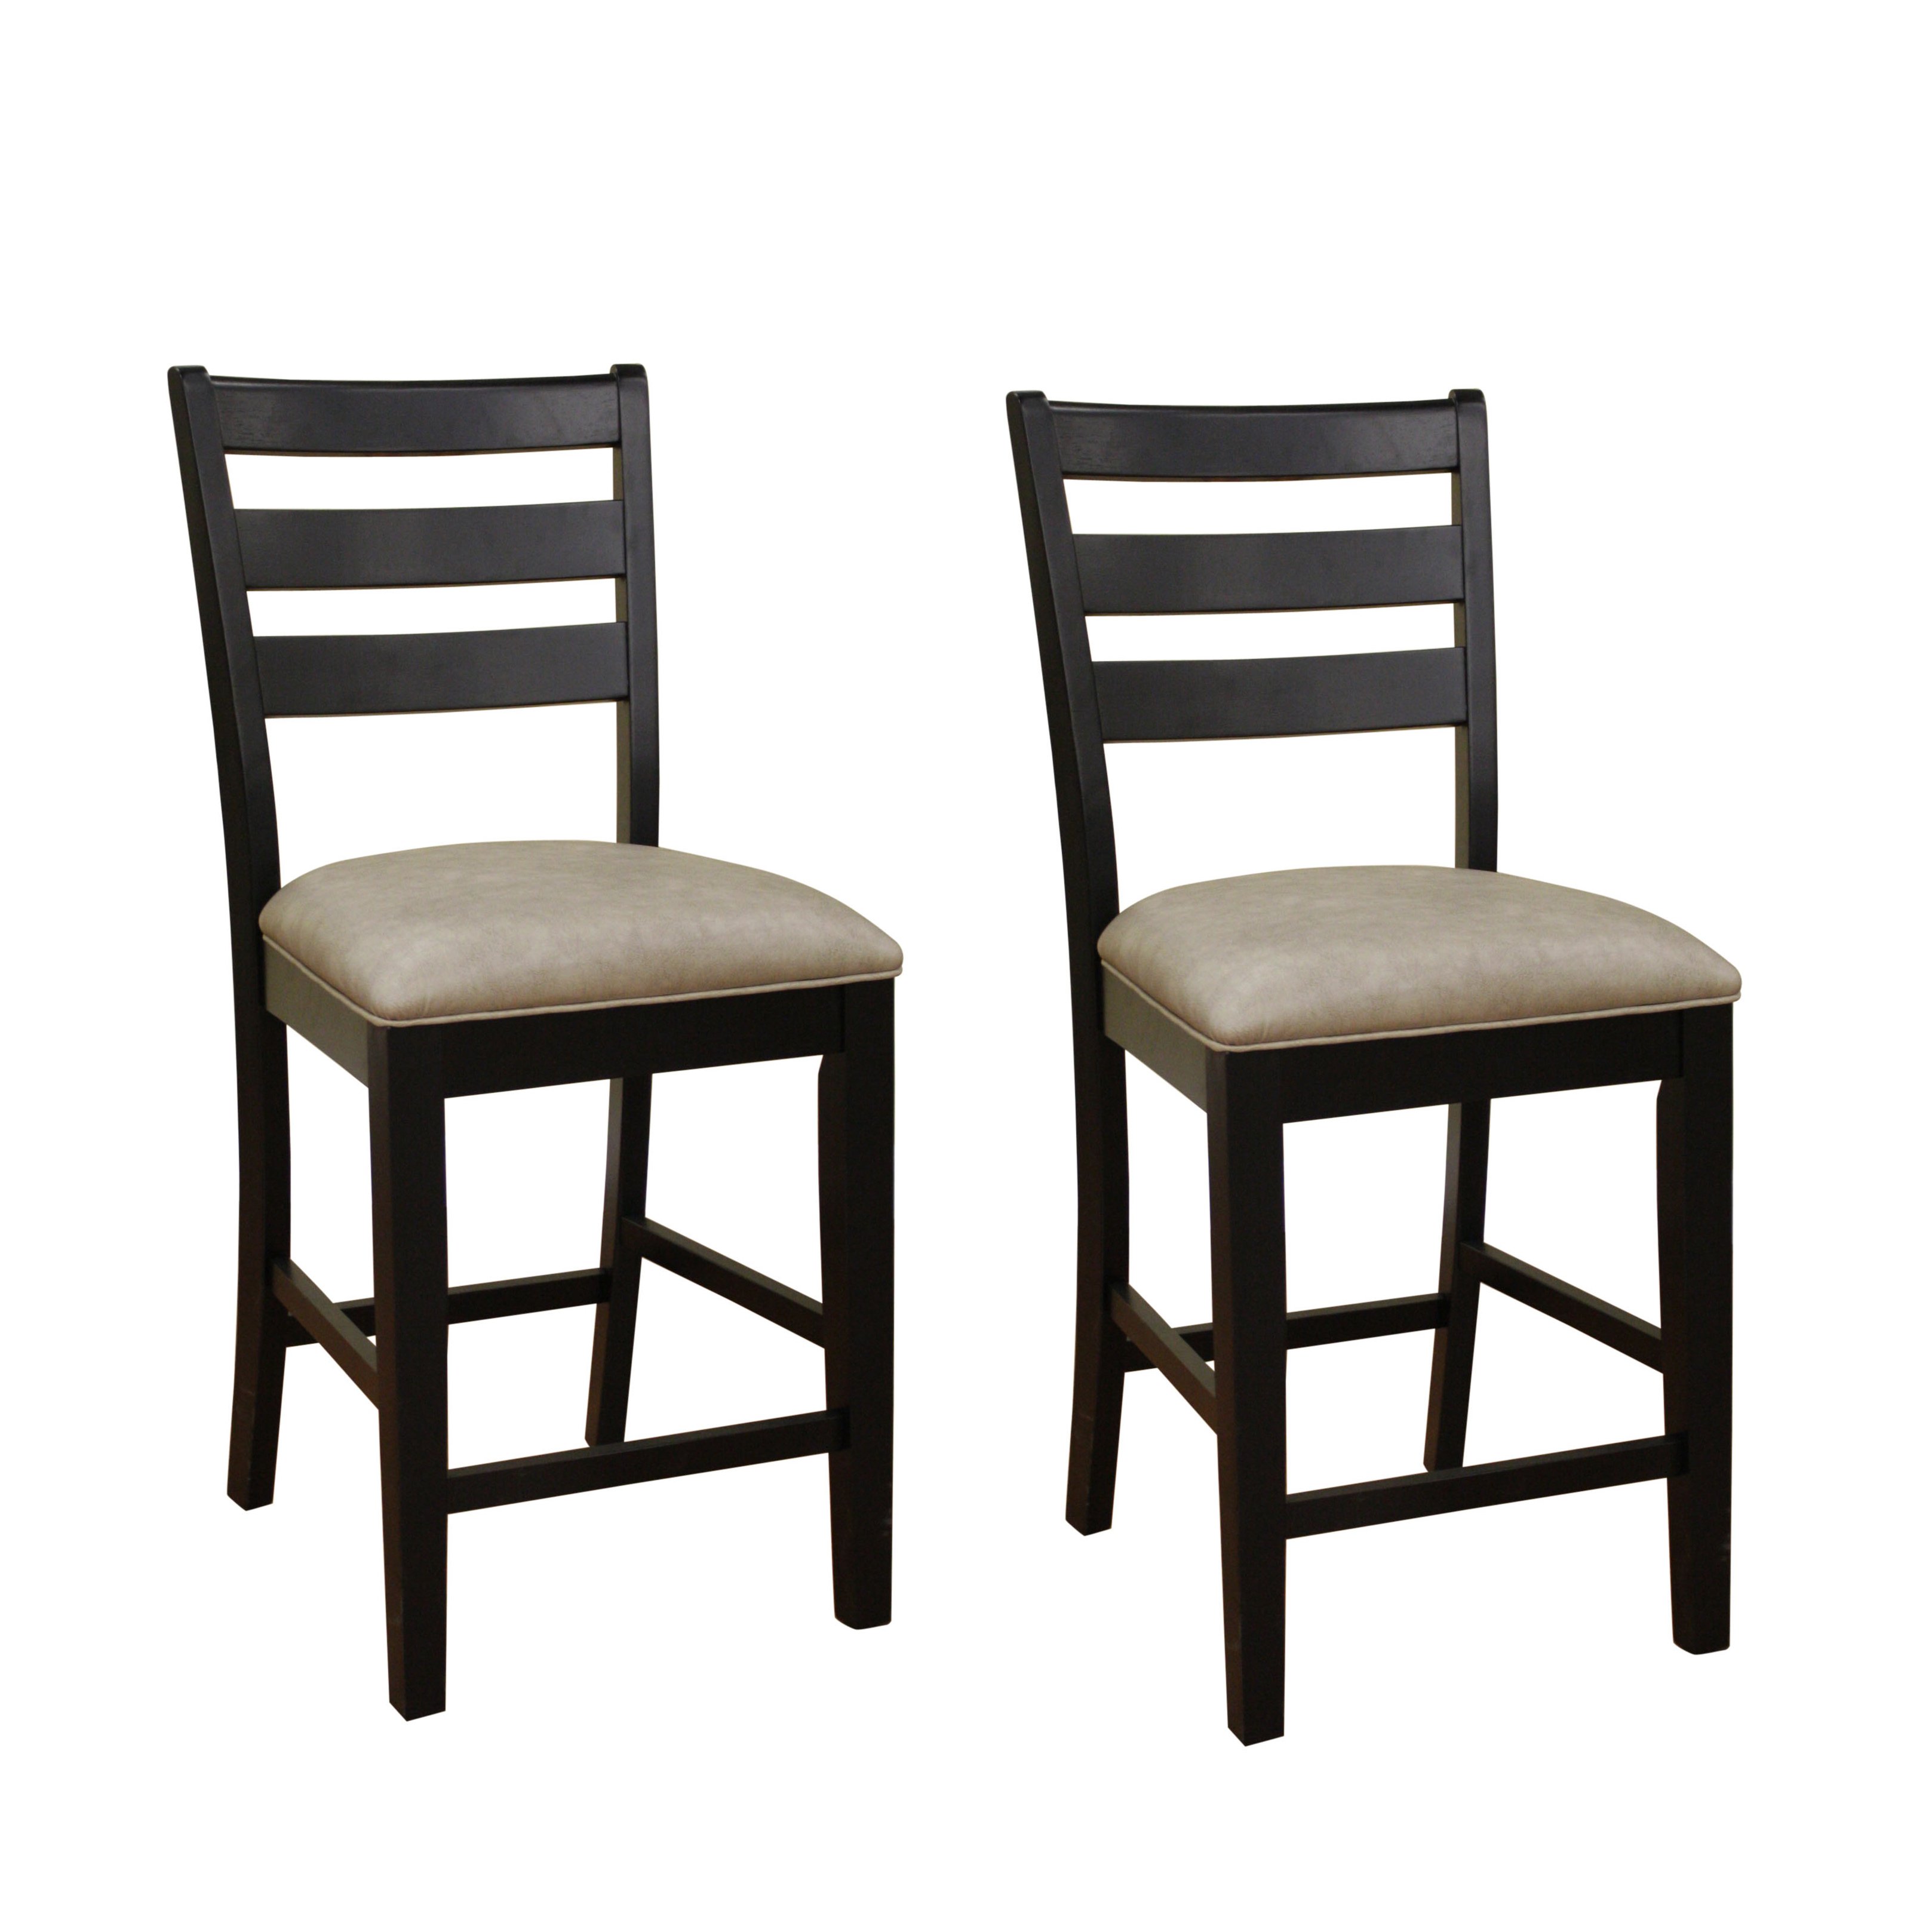 dining chair height american heritage salma black slat back counter height dining chair